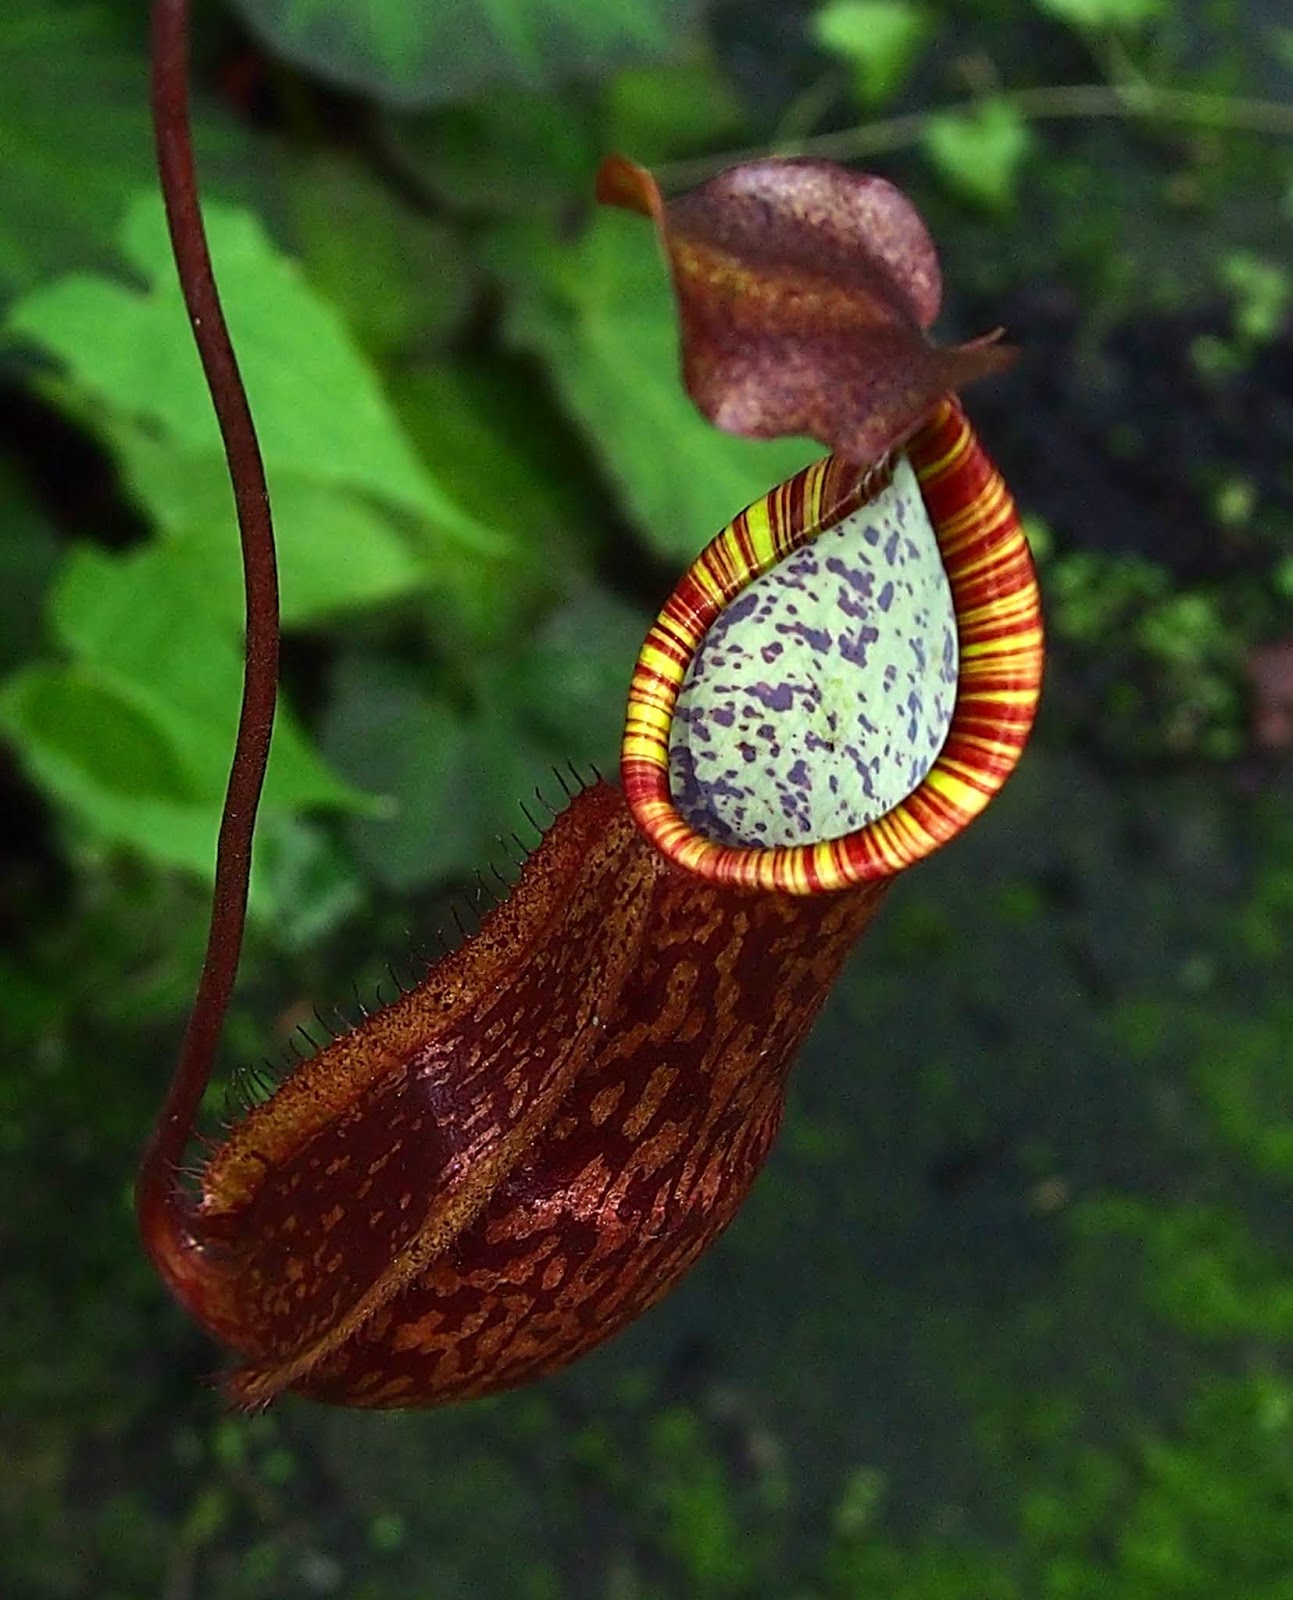 Another Nepenthes species without a name